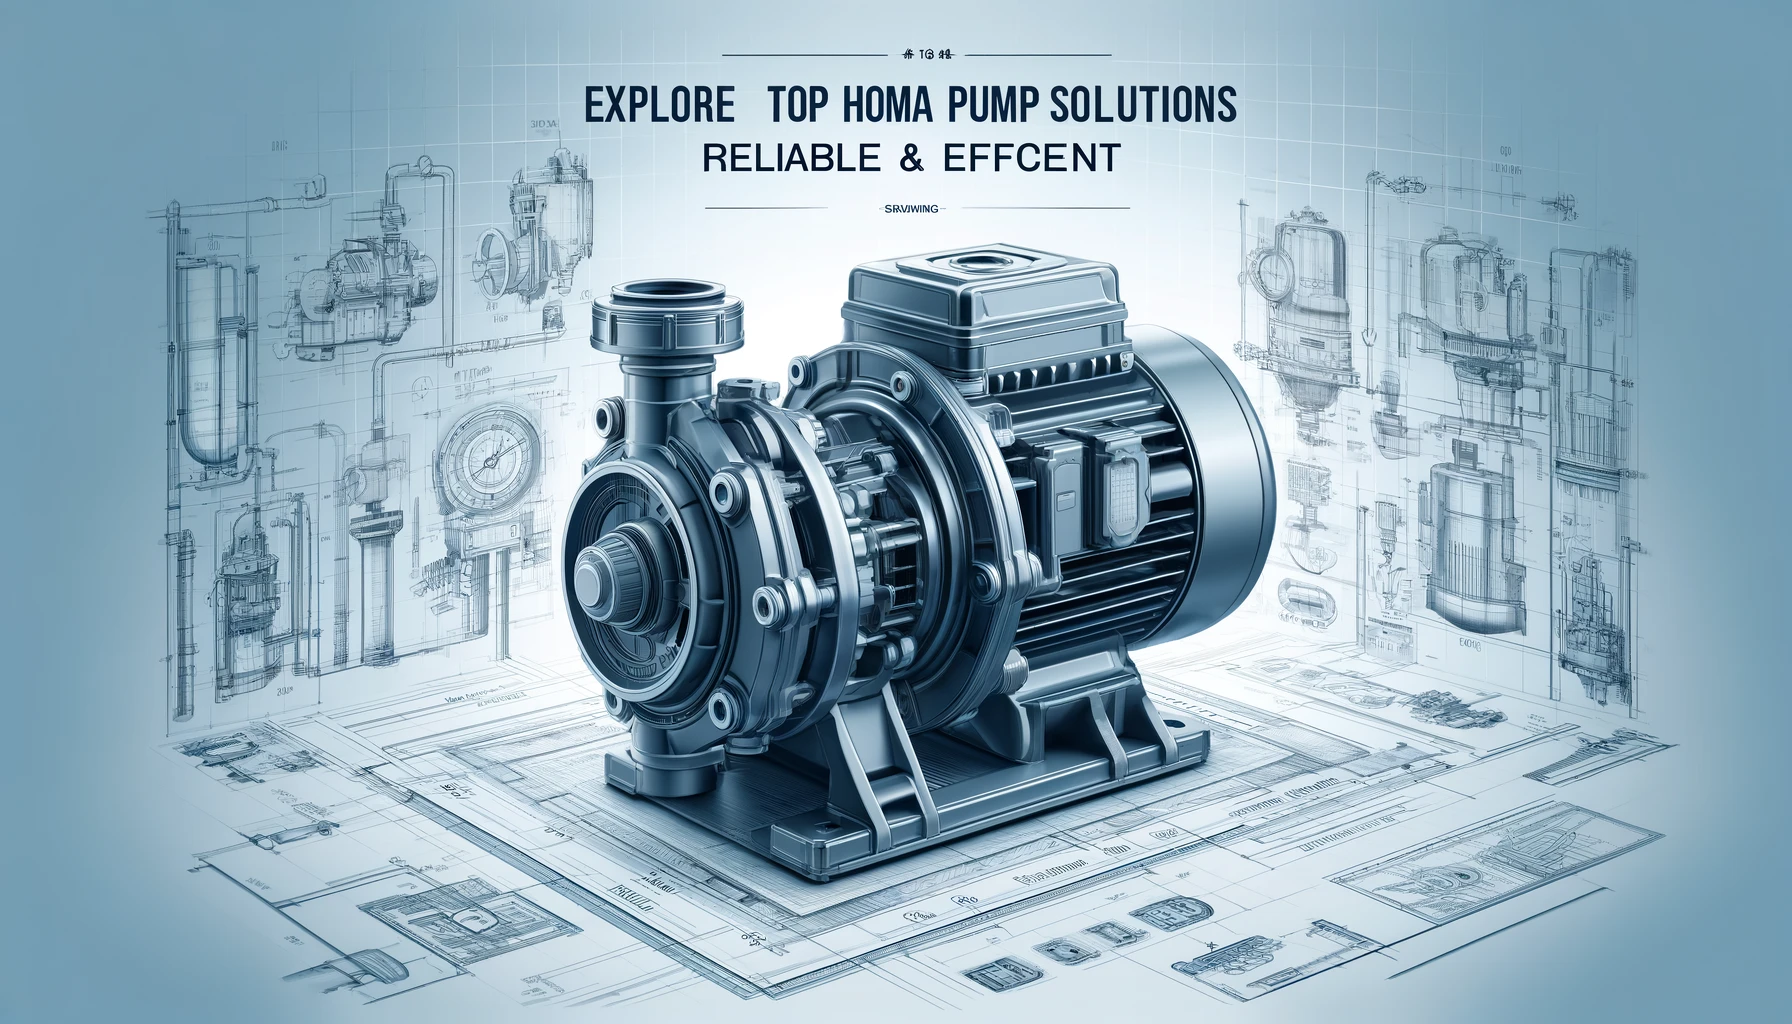 Advertisement for Homa Pump Solutions featuring a series of efficient water pumps on a blueprint background.